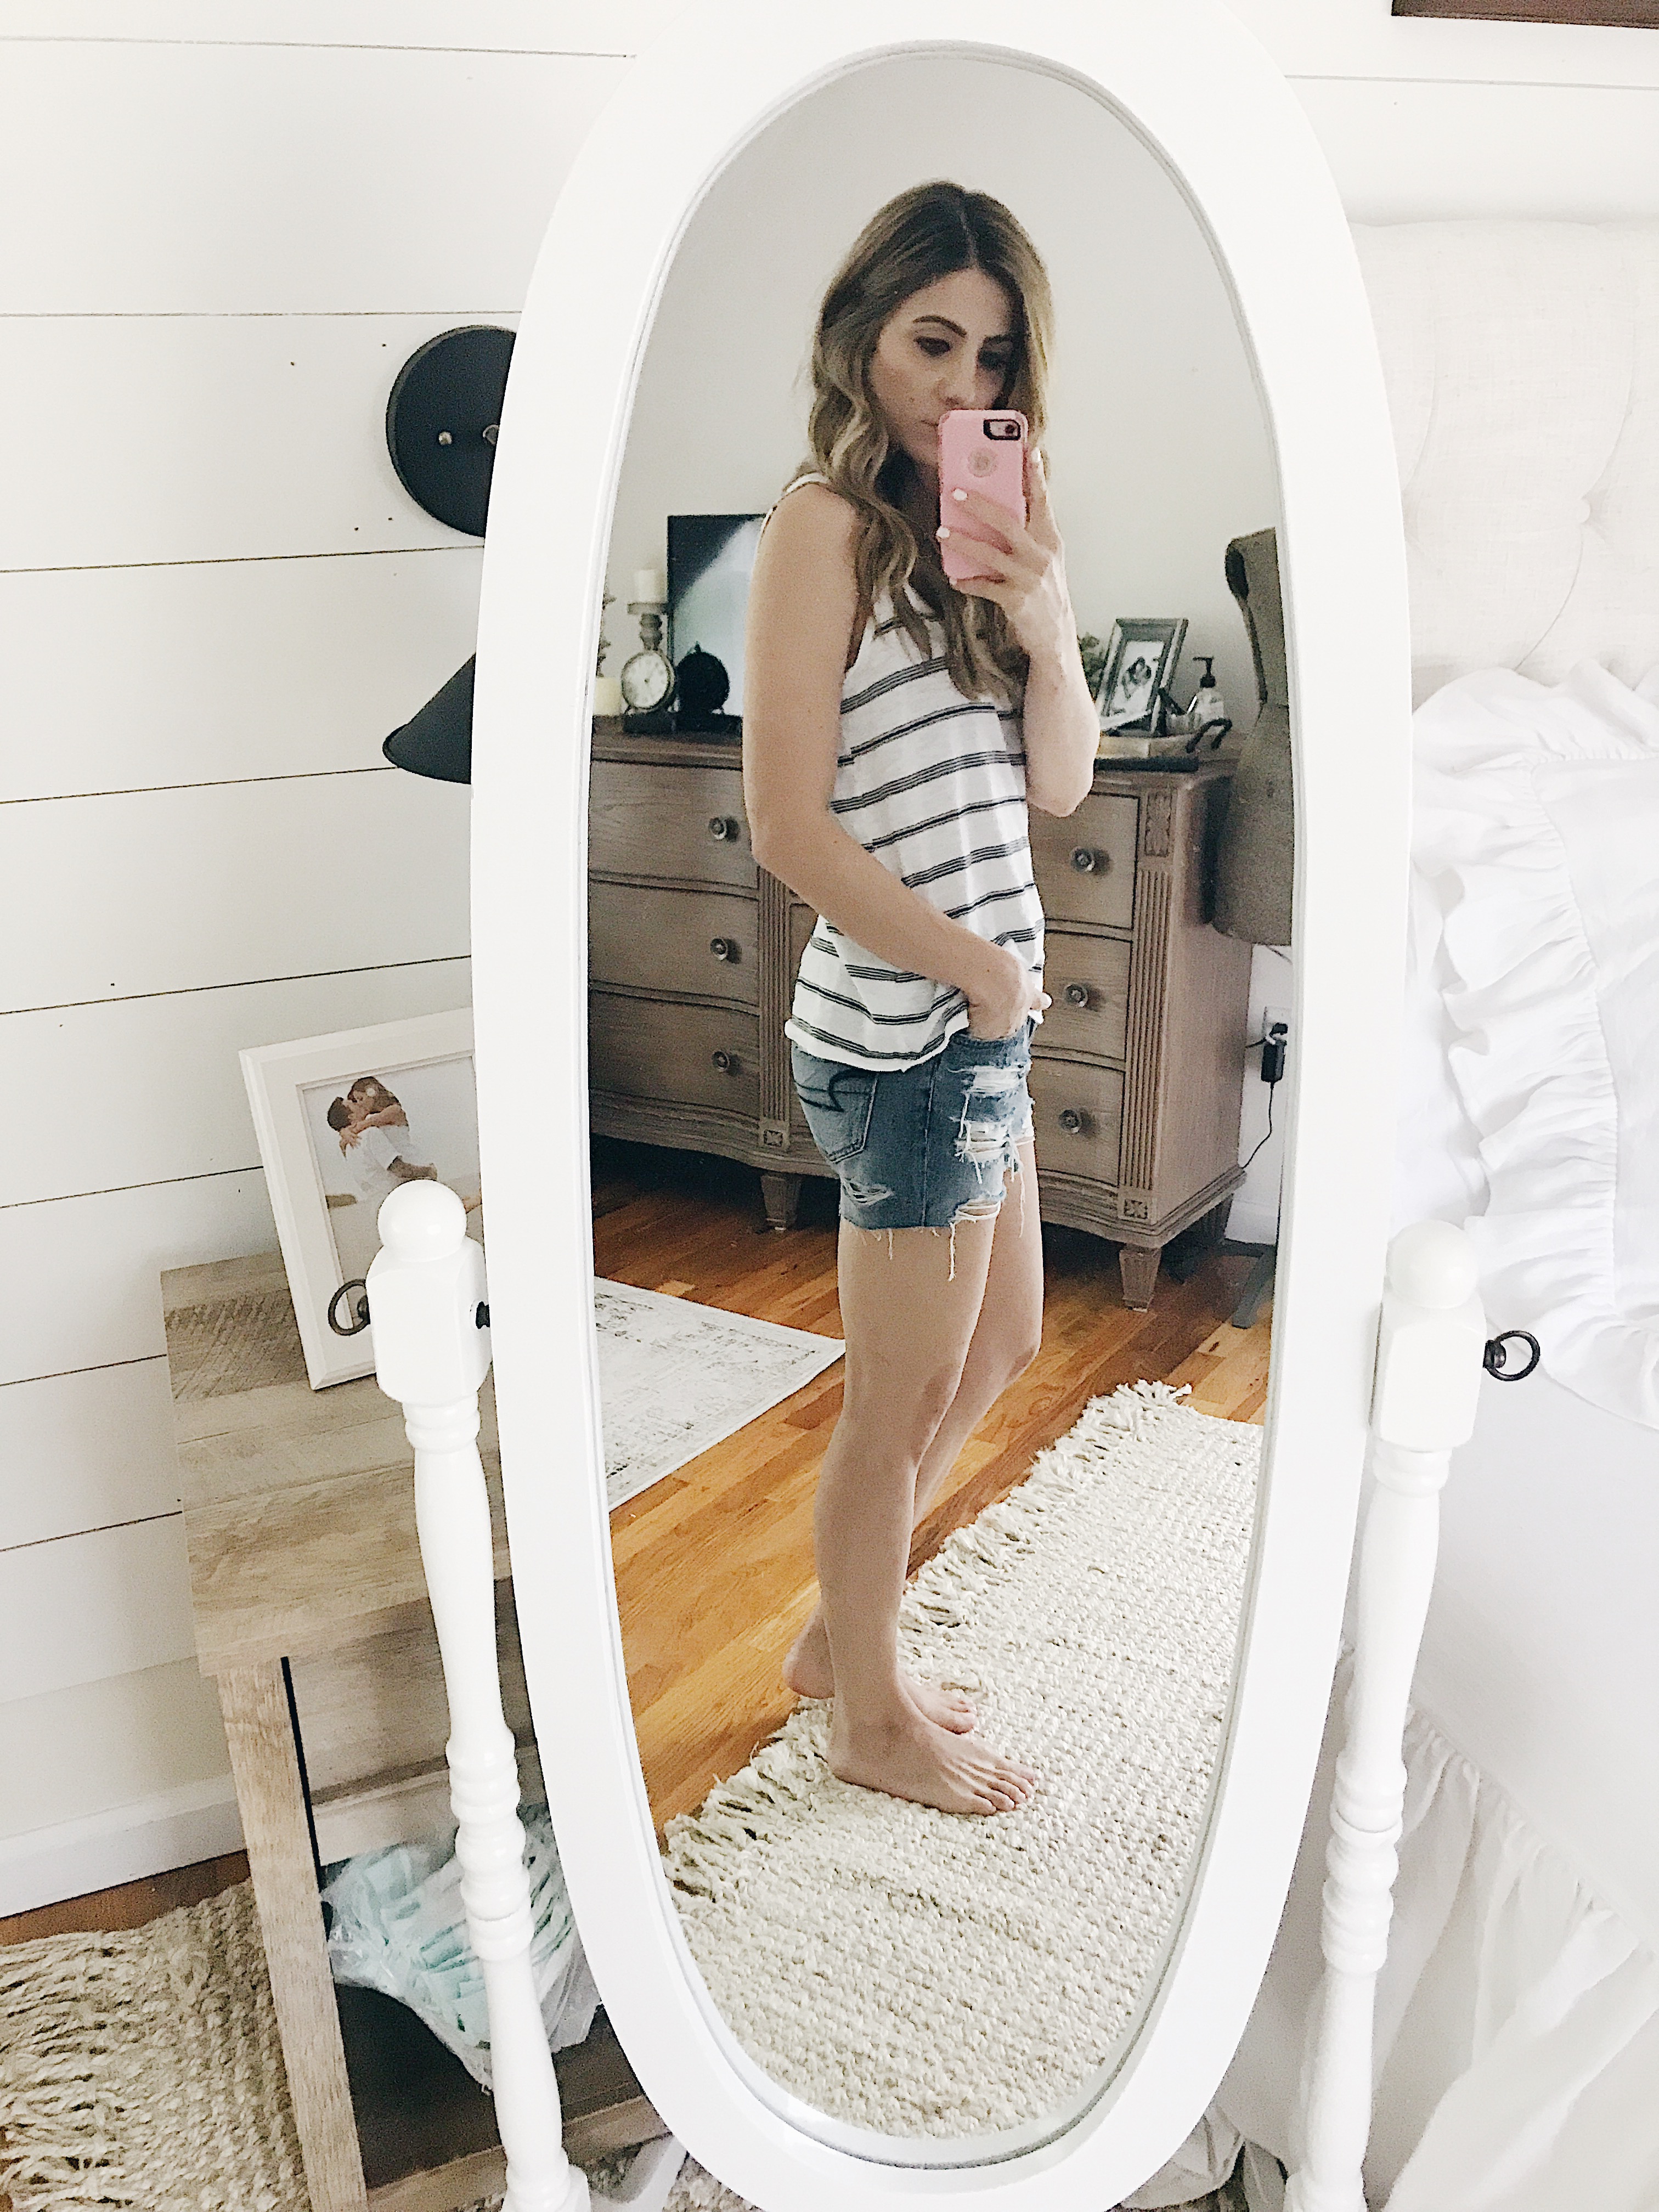 A full review of the Best Mom Shorts, including information on rise, inseam, and photos to show fit! Including a review of American Eagle's Tomgirl shorts. 